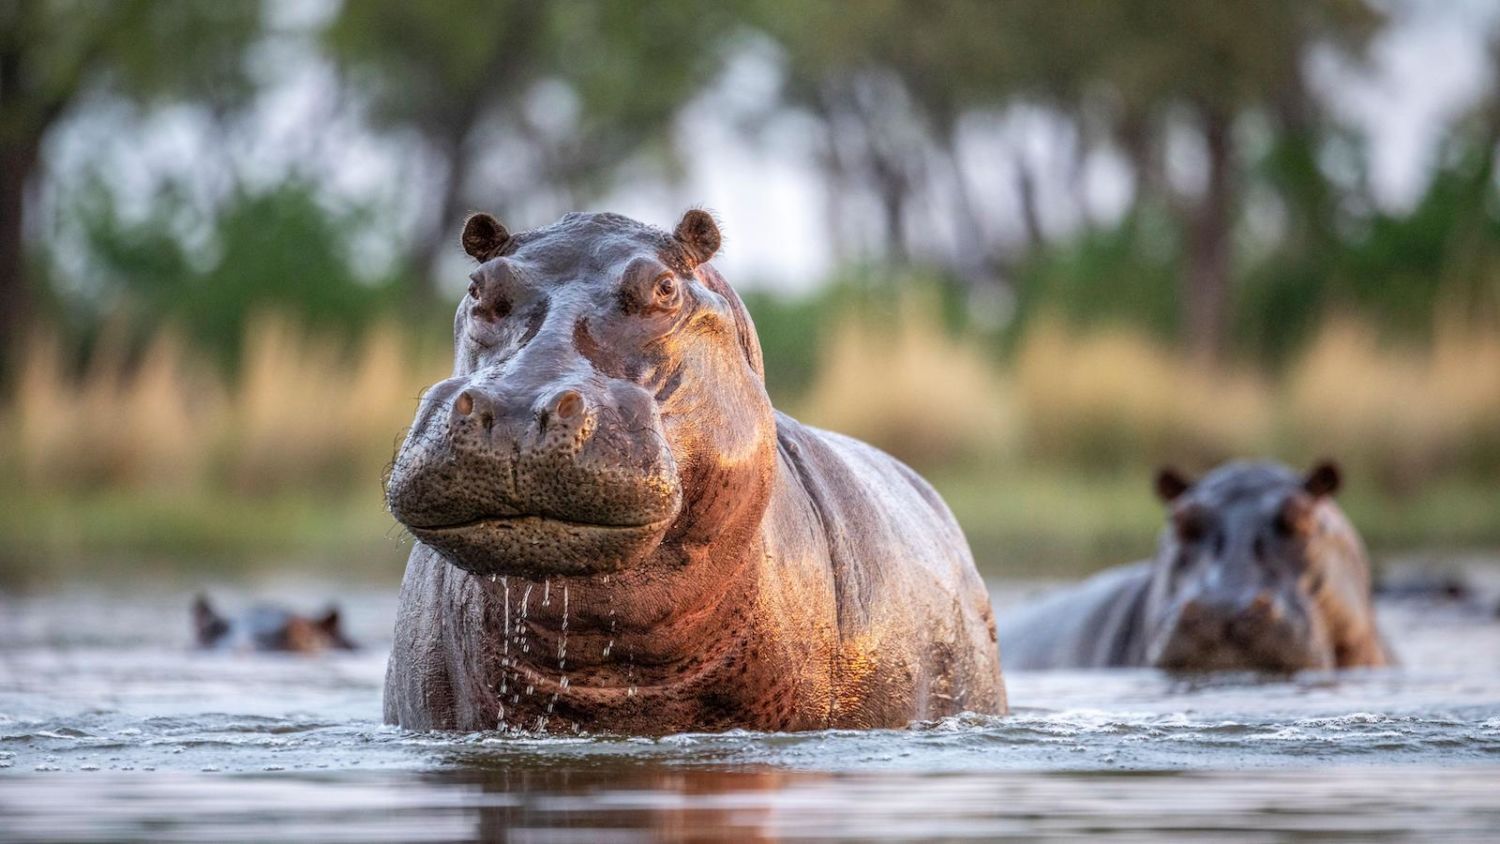 Hippos Are in Trouble. Will an Endangered Listing Save Them?